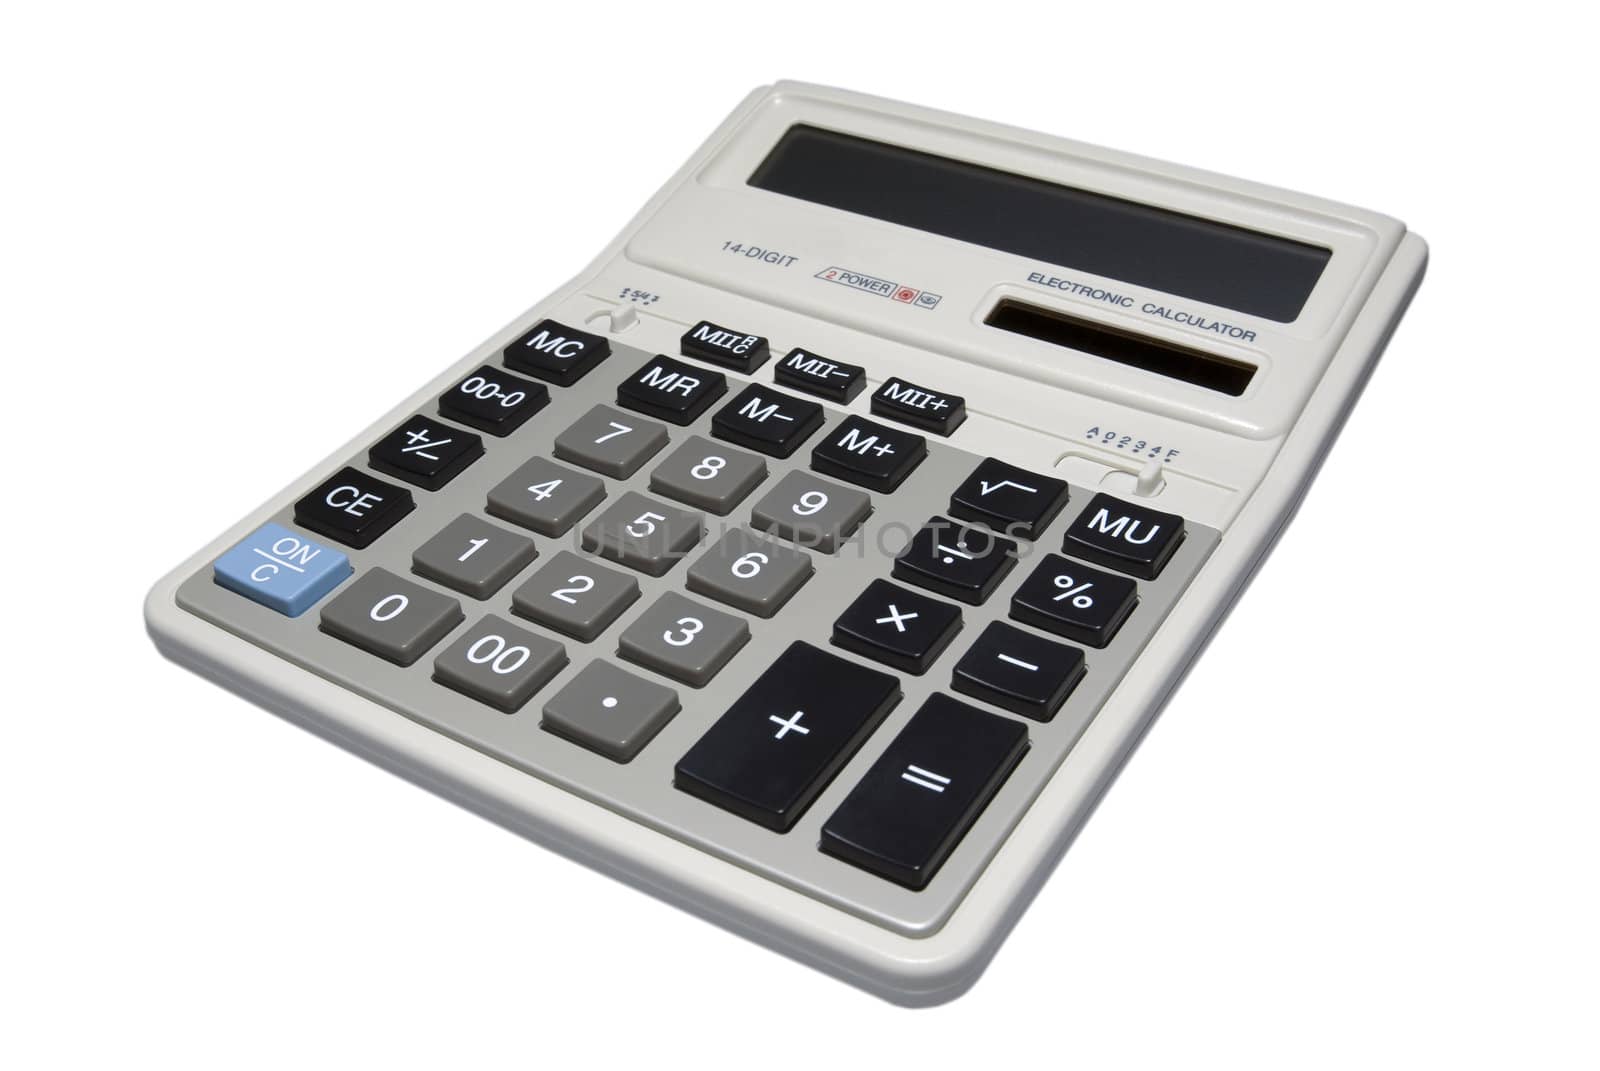 Calculator isolated on white background with clipping path.